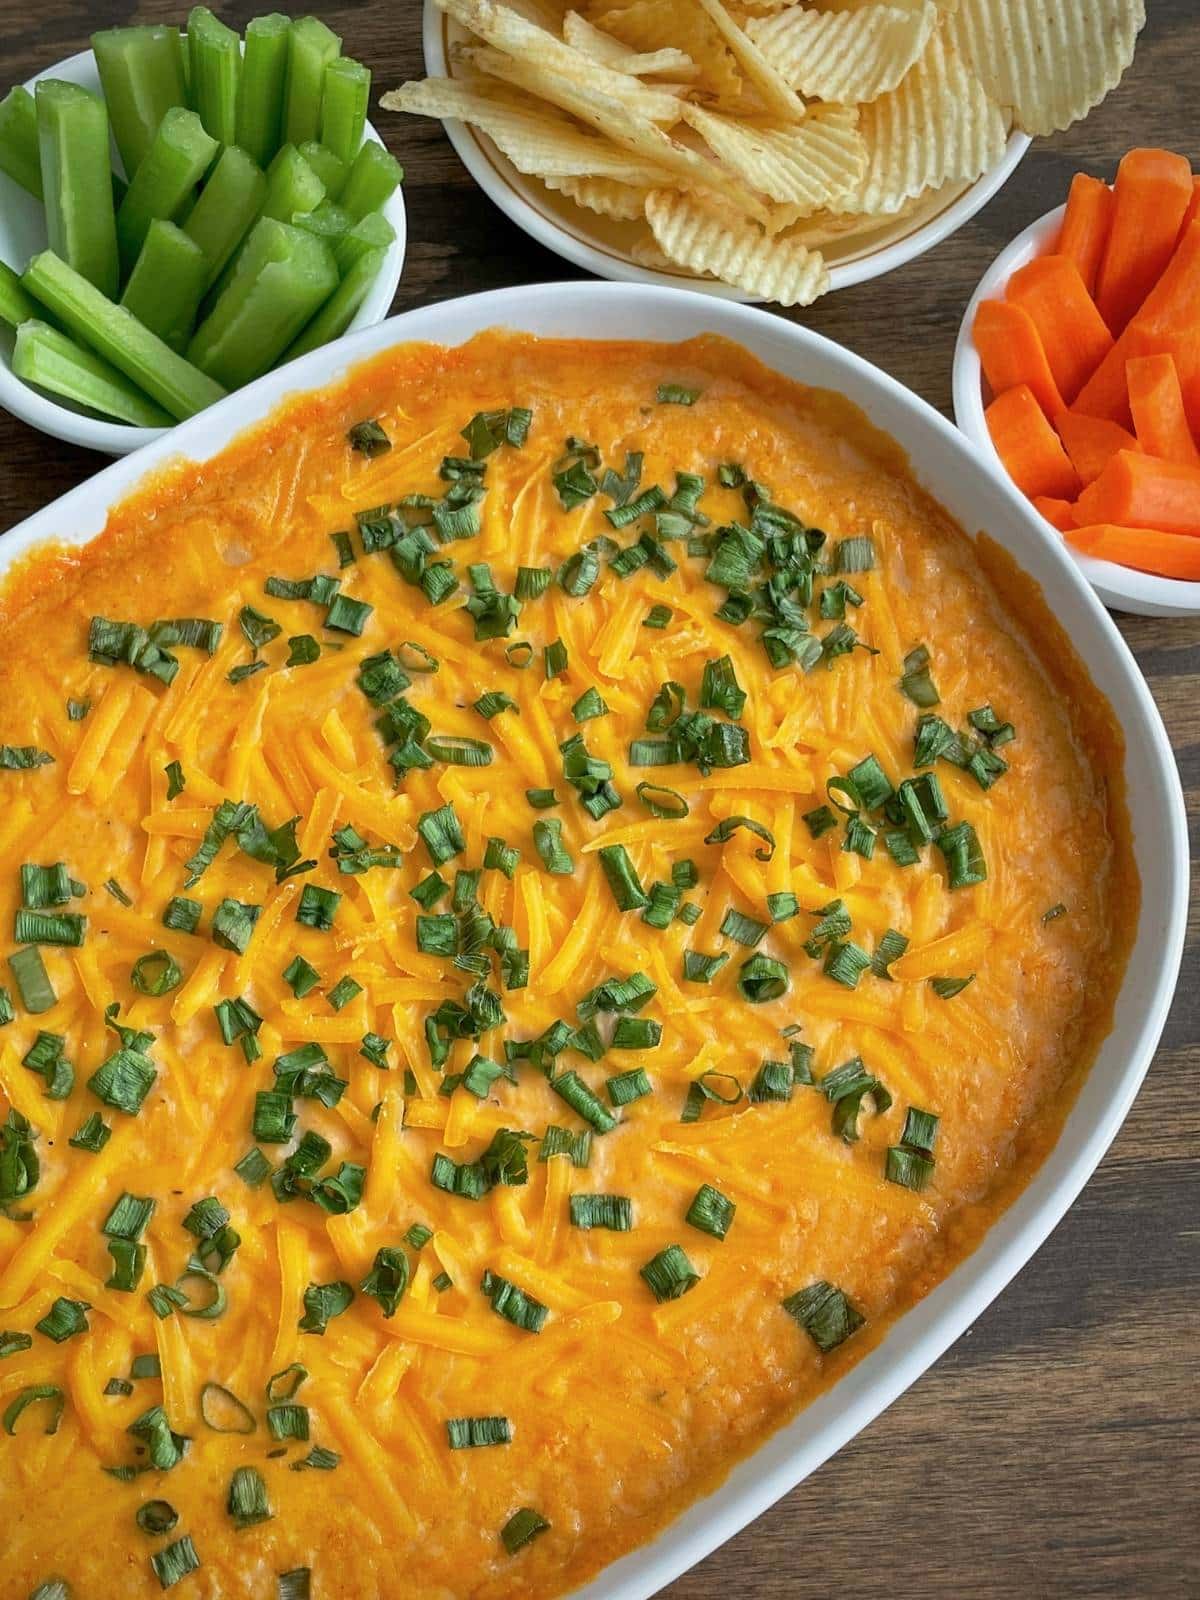 Buffalo Dip with Chips and Veggies